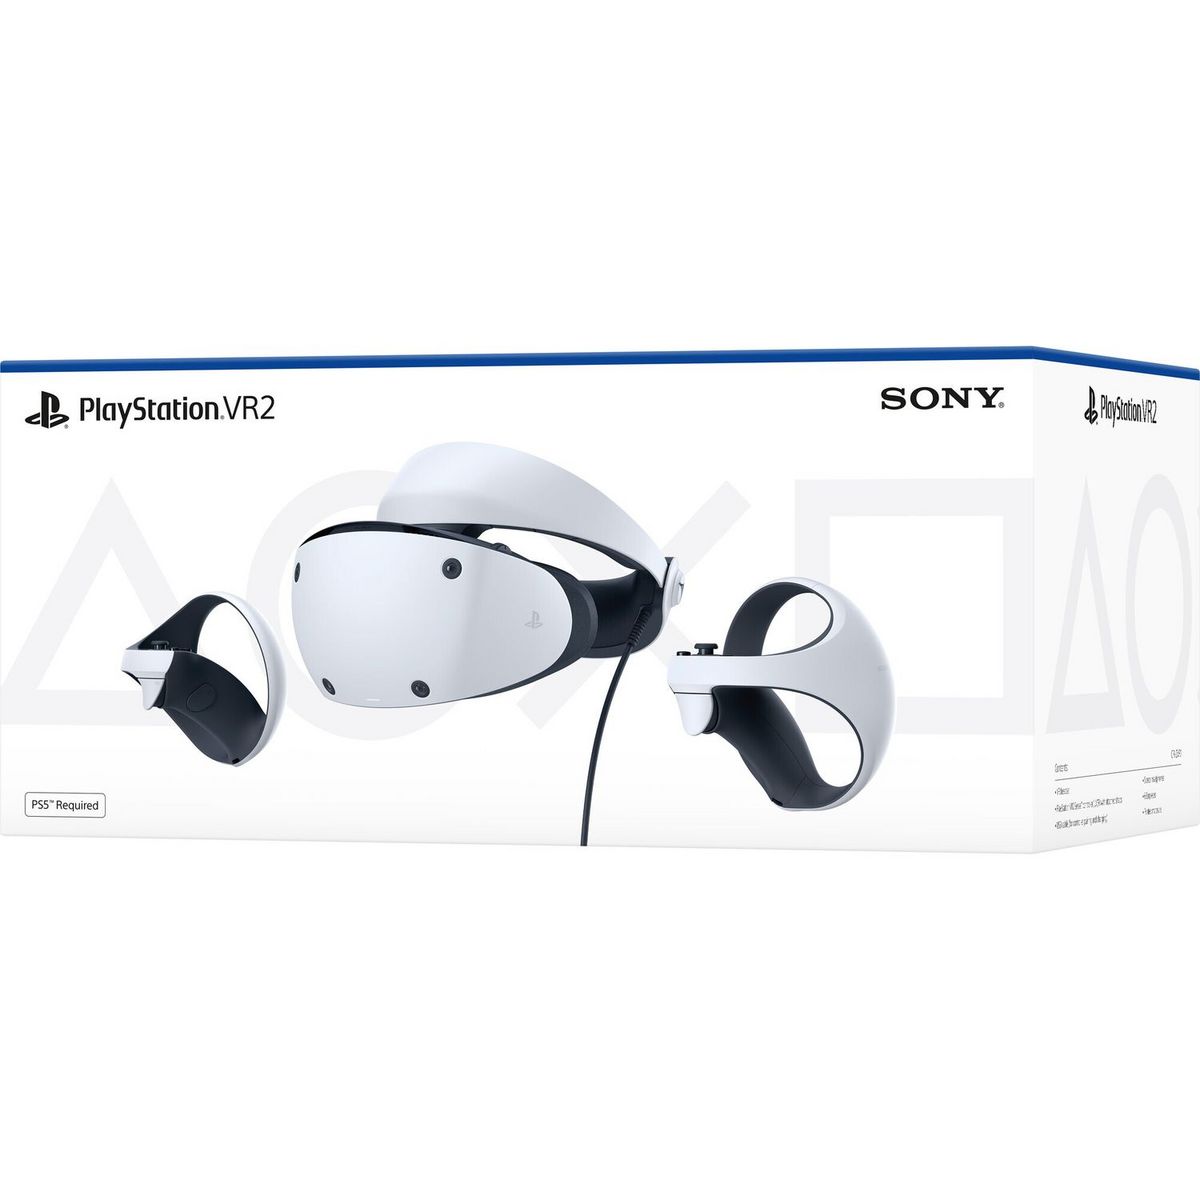 SONY Casque Playstation VR2 PS5 pas cher 